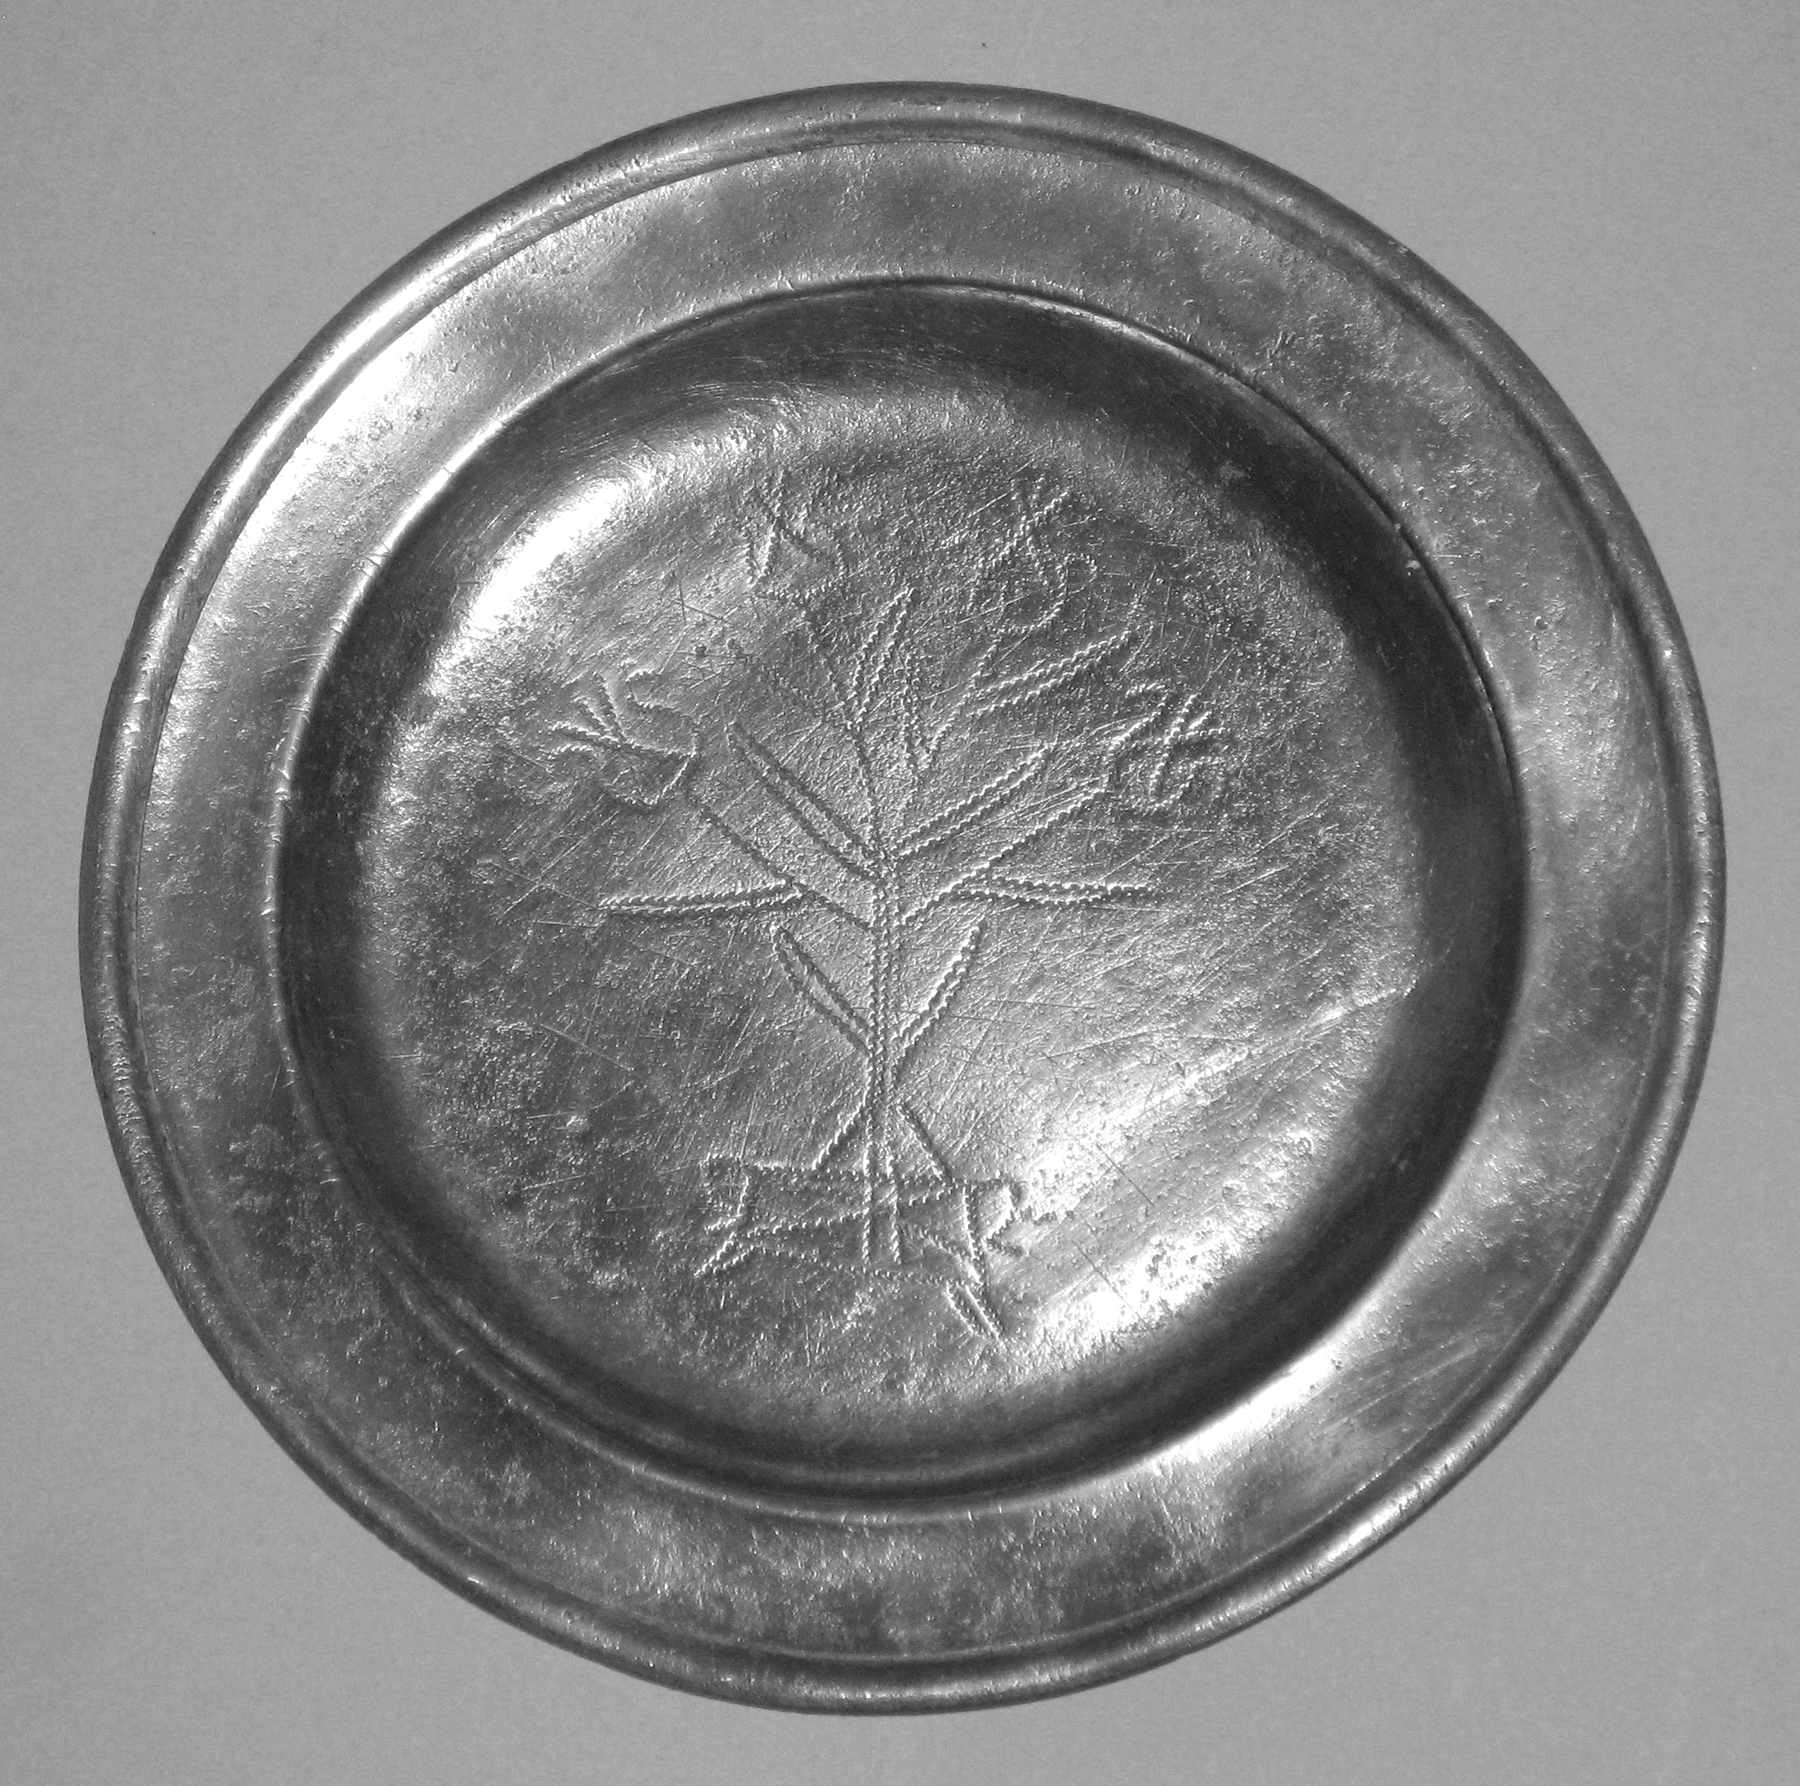 1956.0059.011 Pewter plate